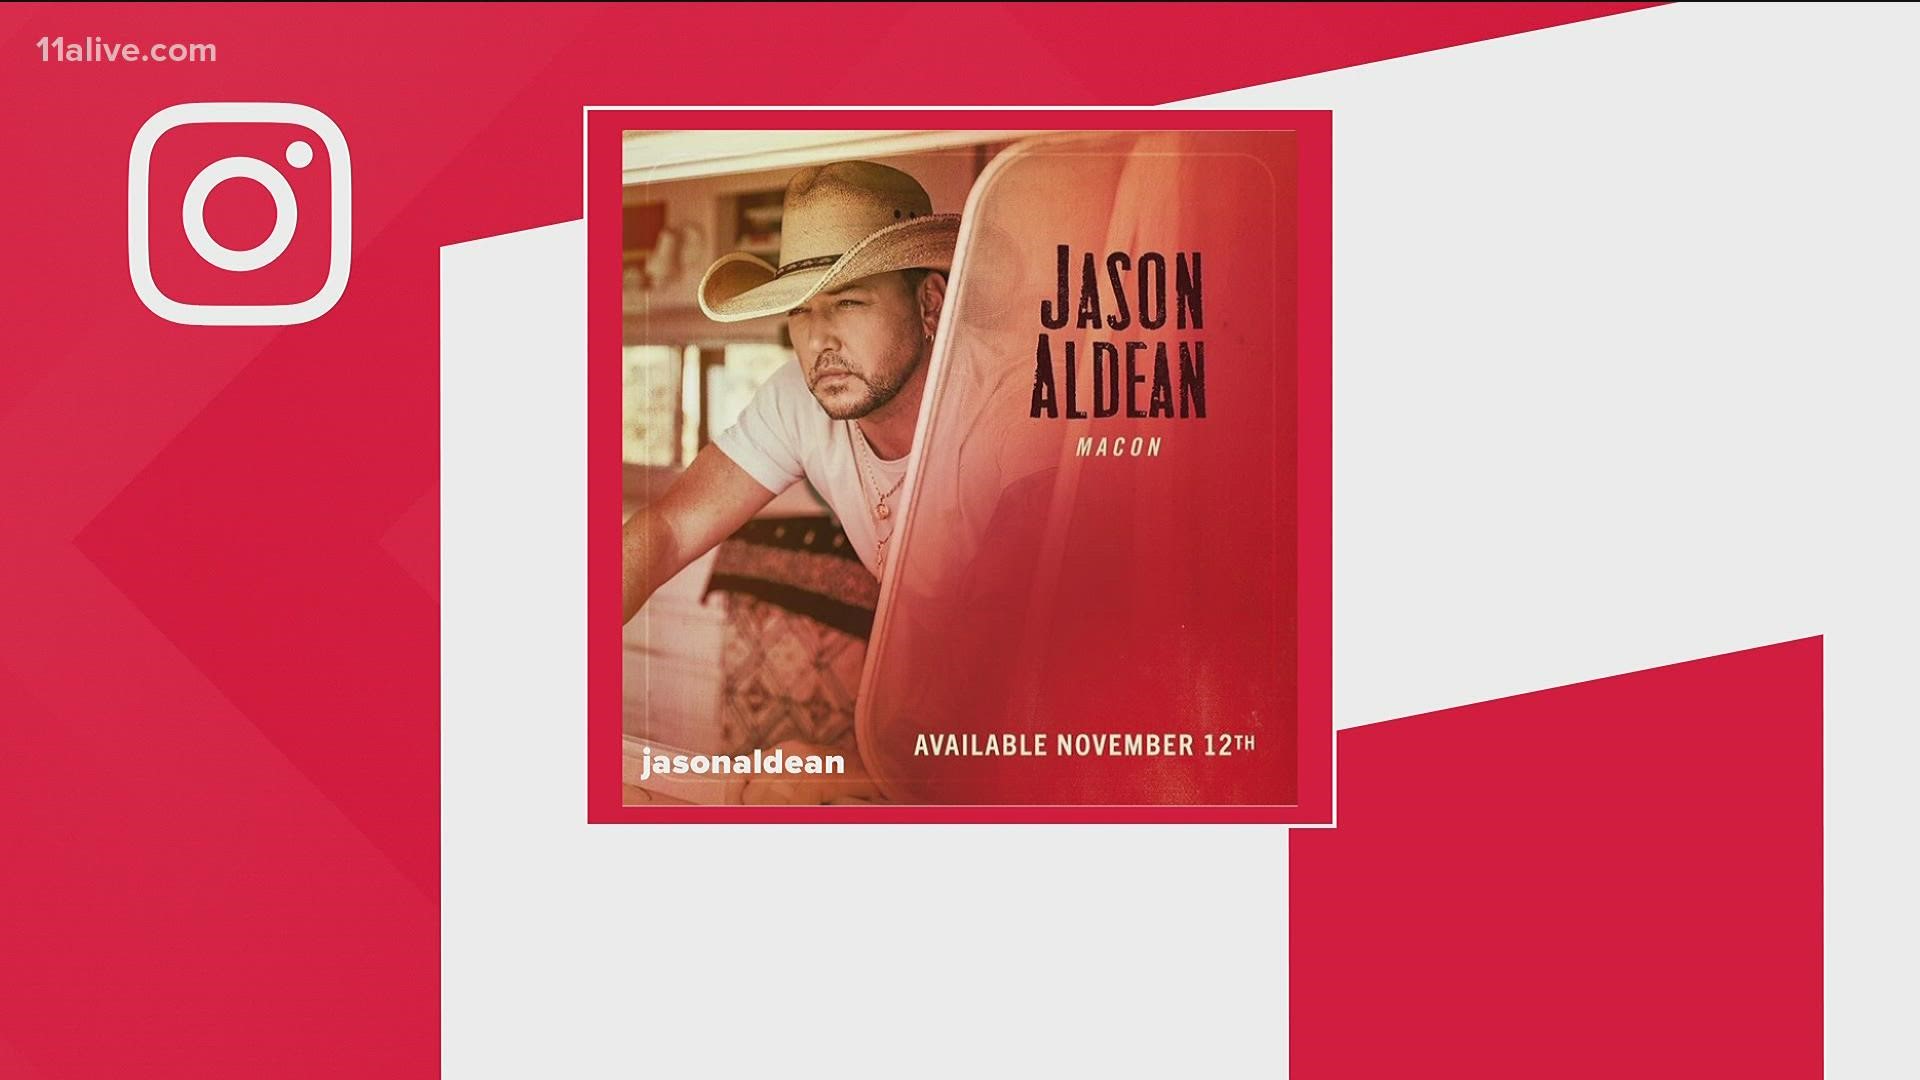 Jason Aldean released he title of his new album "Macon," paying homage to his hometown.